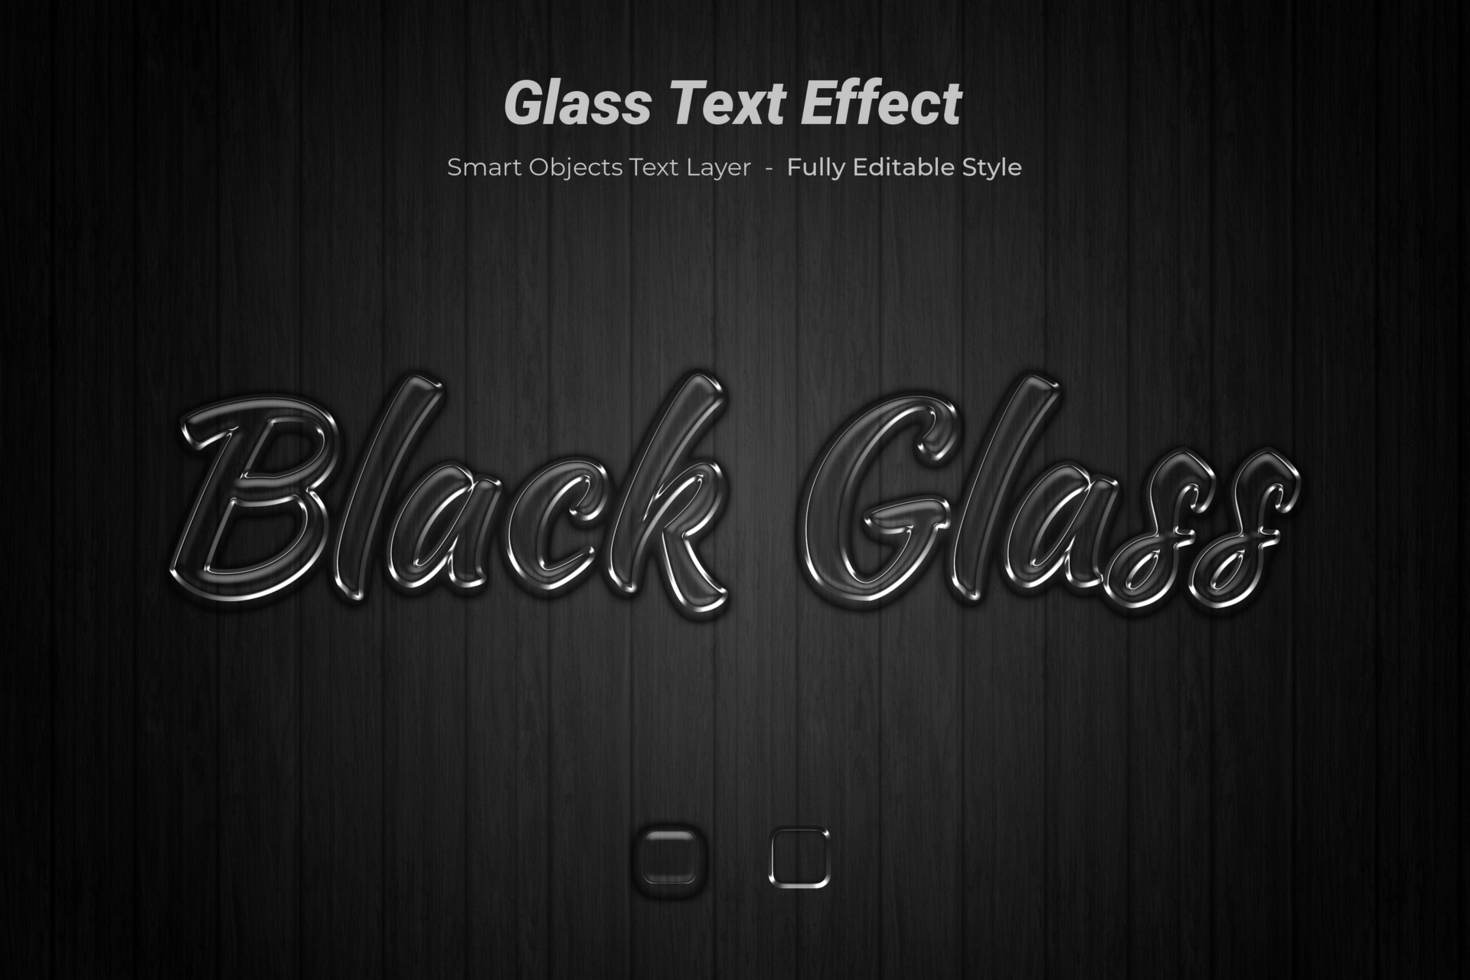 Glass Text Style Effect Mockup psd